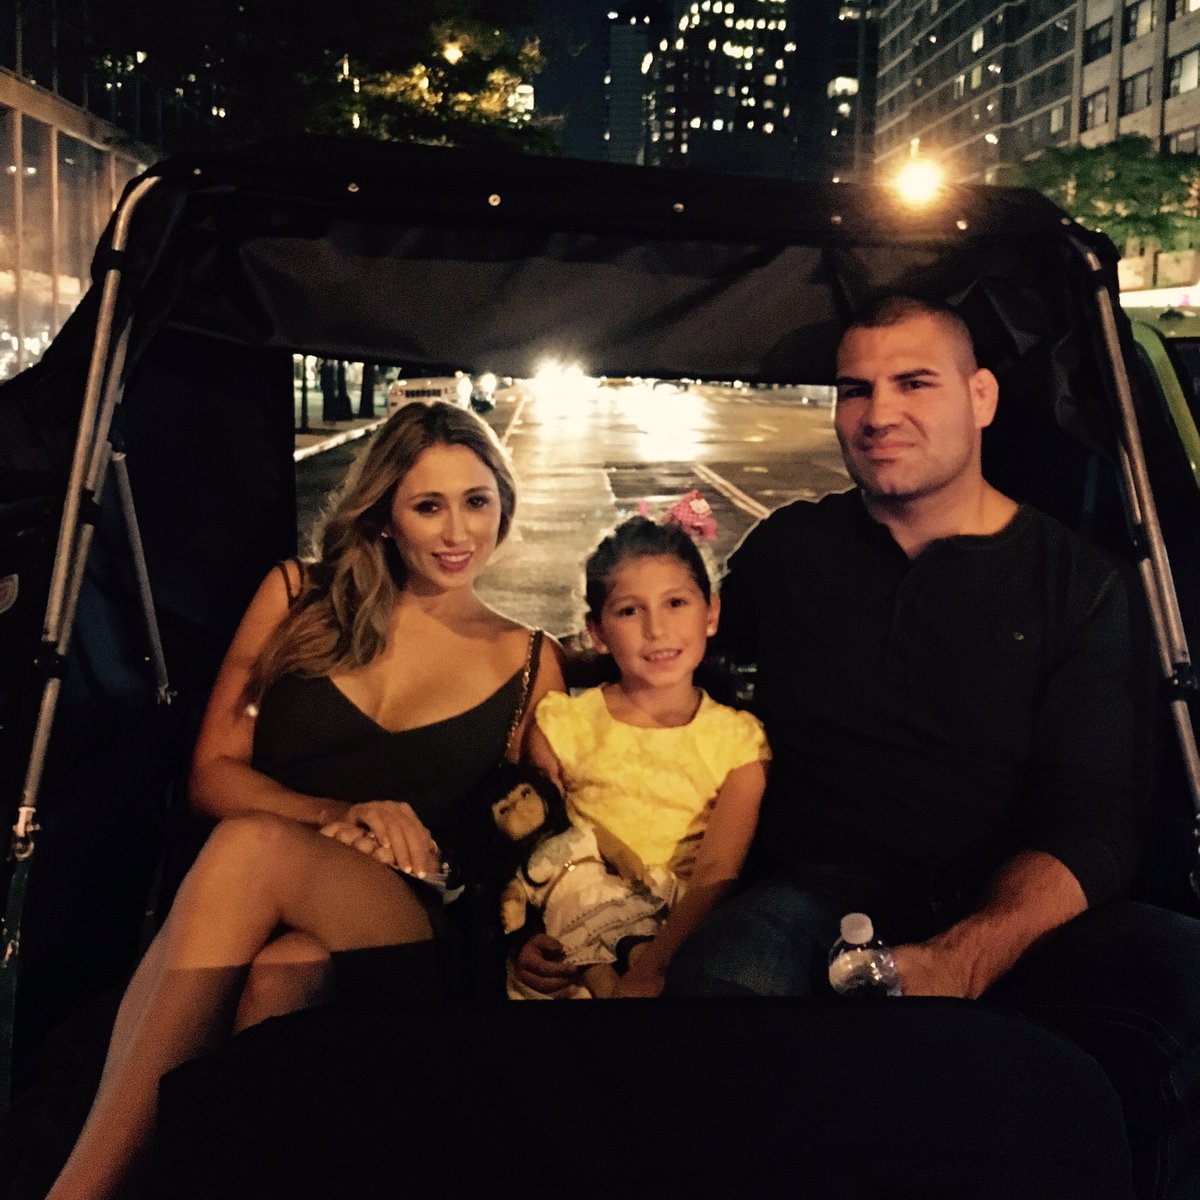 Cain Velasquez on Twitter: &amp;quot;NYC is an amazing city. A carriage ride around Central Park with my girls is priceless. #family #nyc https://t.co/Hosl8xSNwk&amp;quot; / Twitter